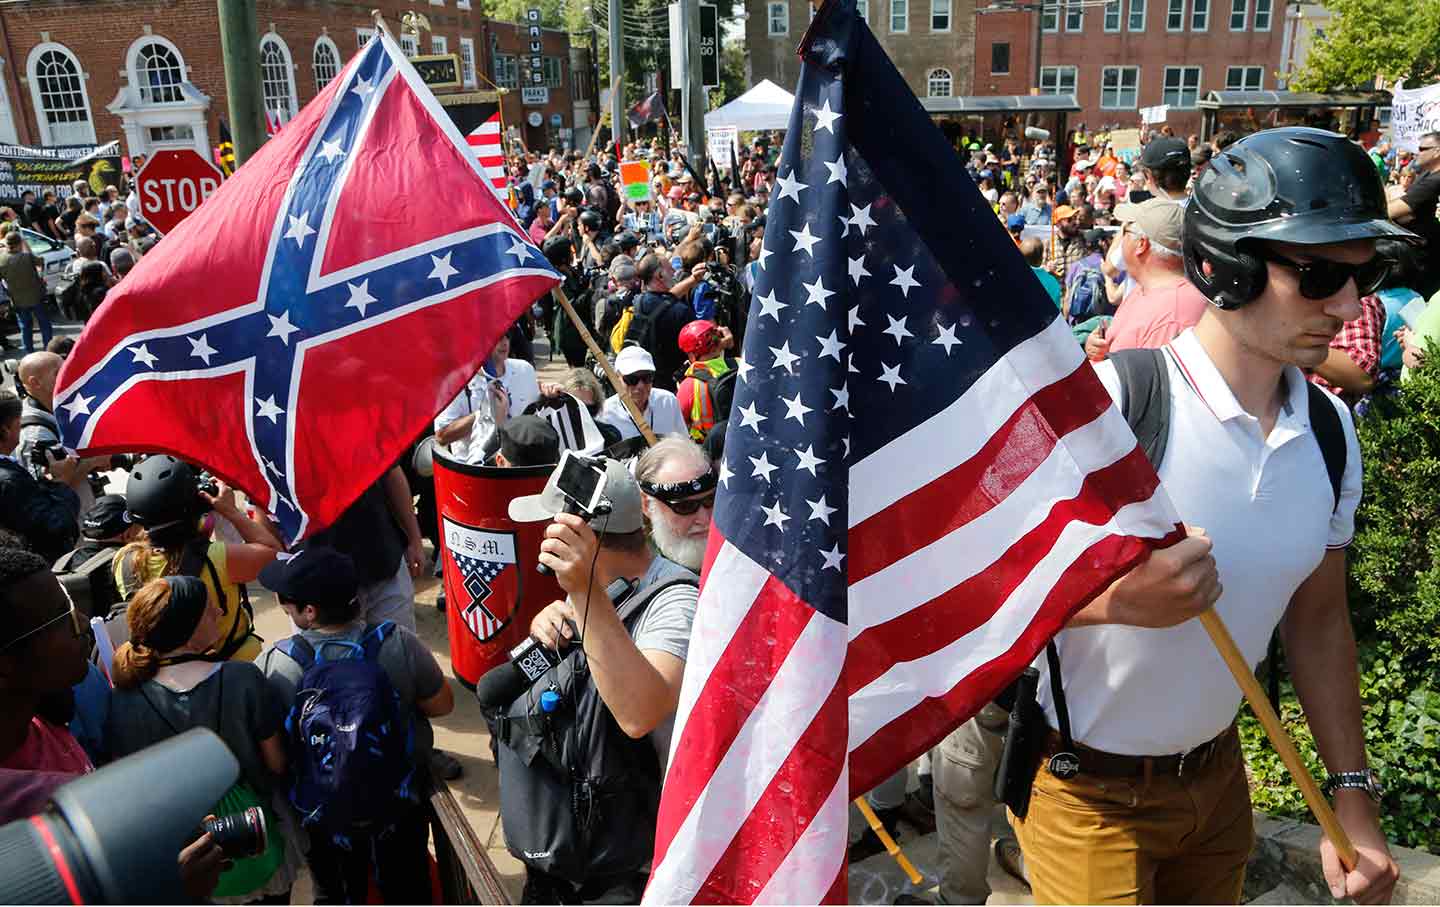 Eric Foner: White Nationalists, Neo-Confederates, and Donald Trump | The Nation